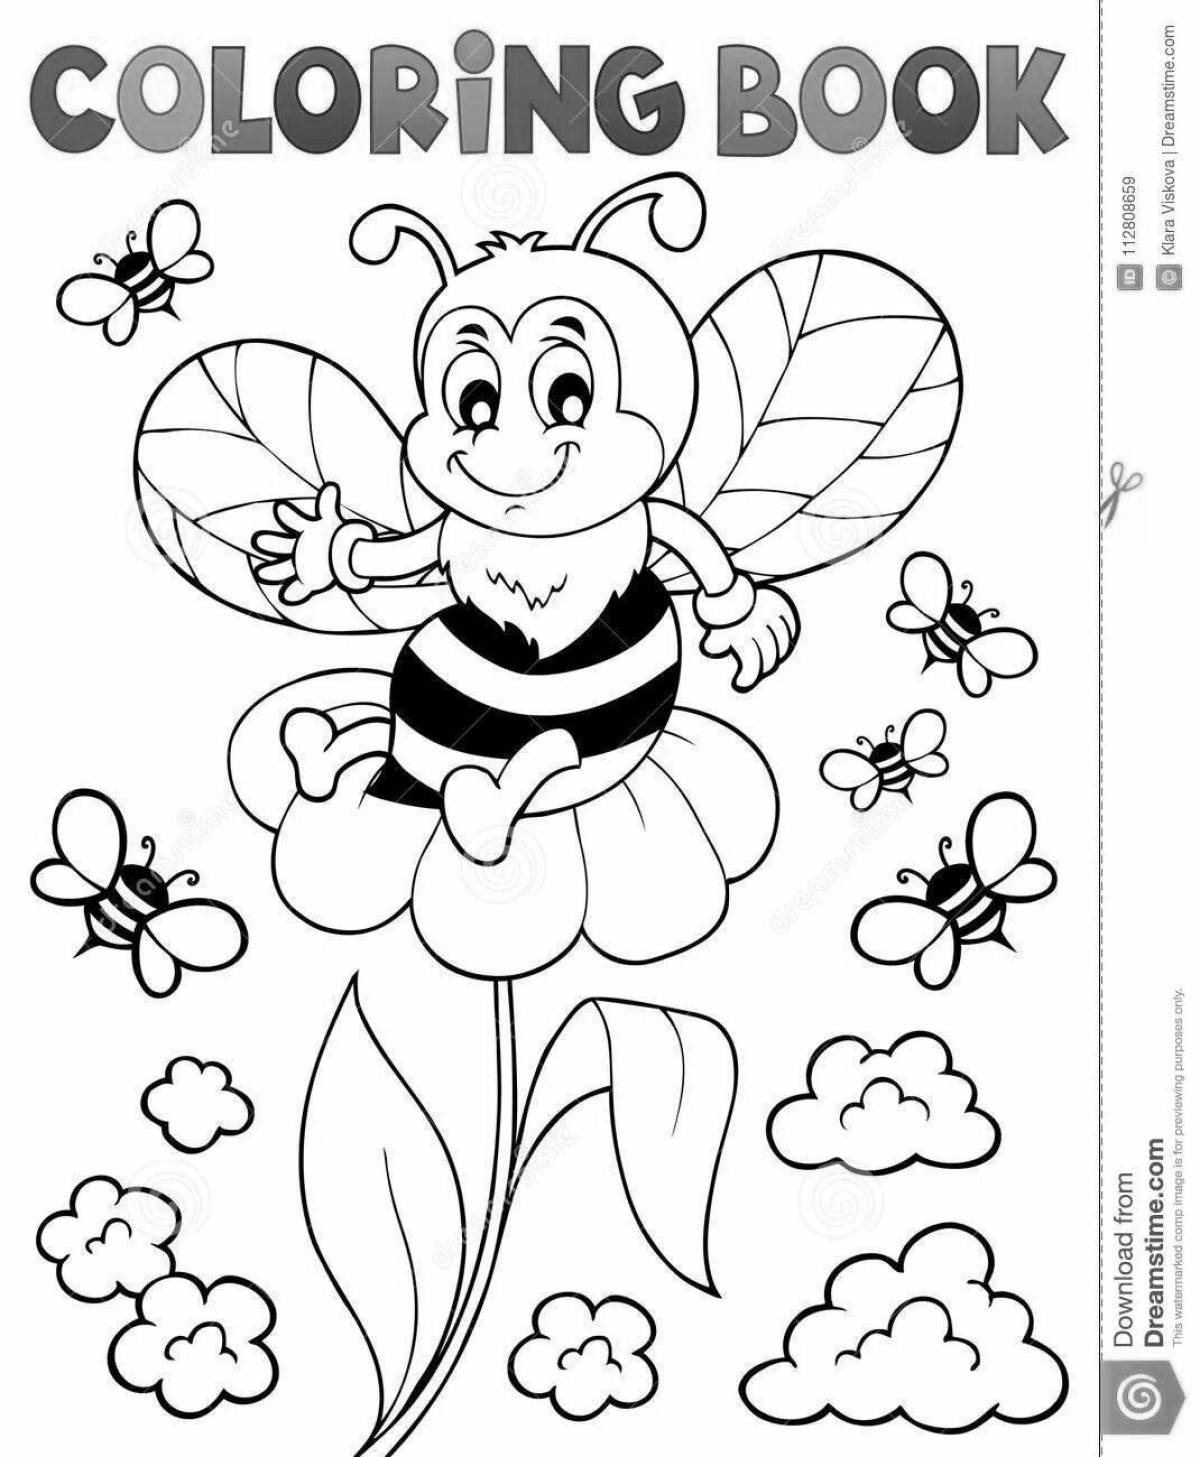 Coloring book funny cat and bee